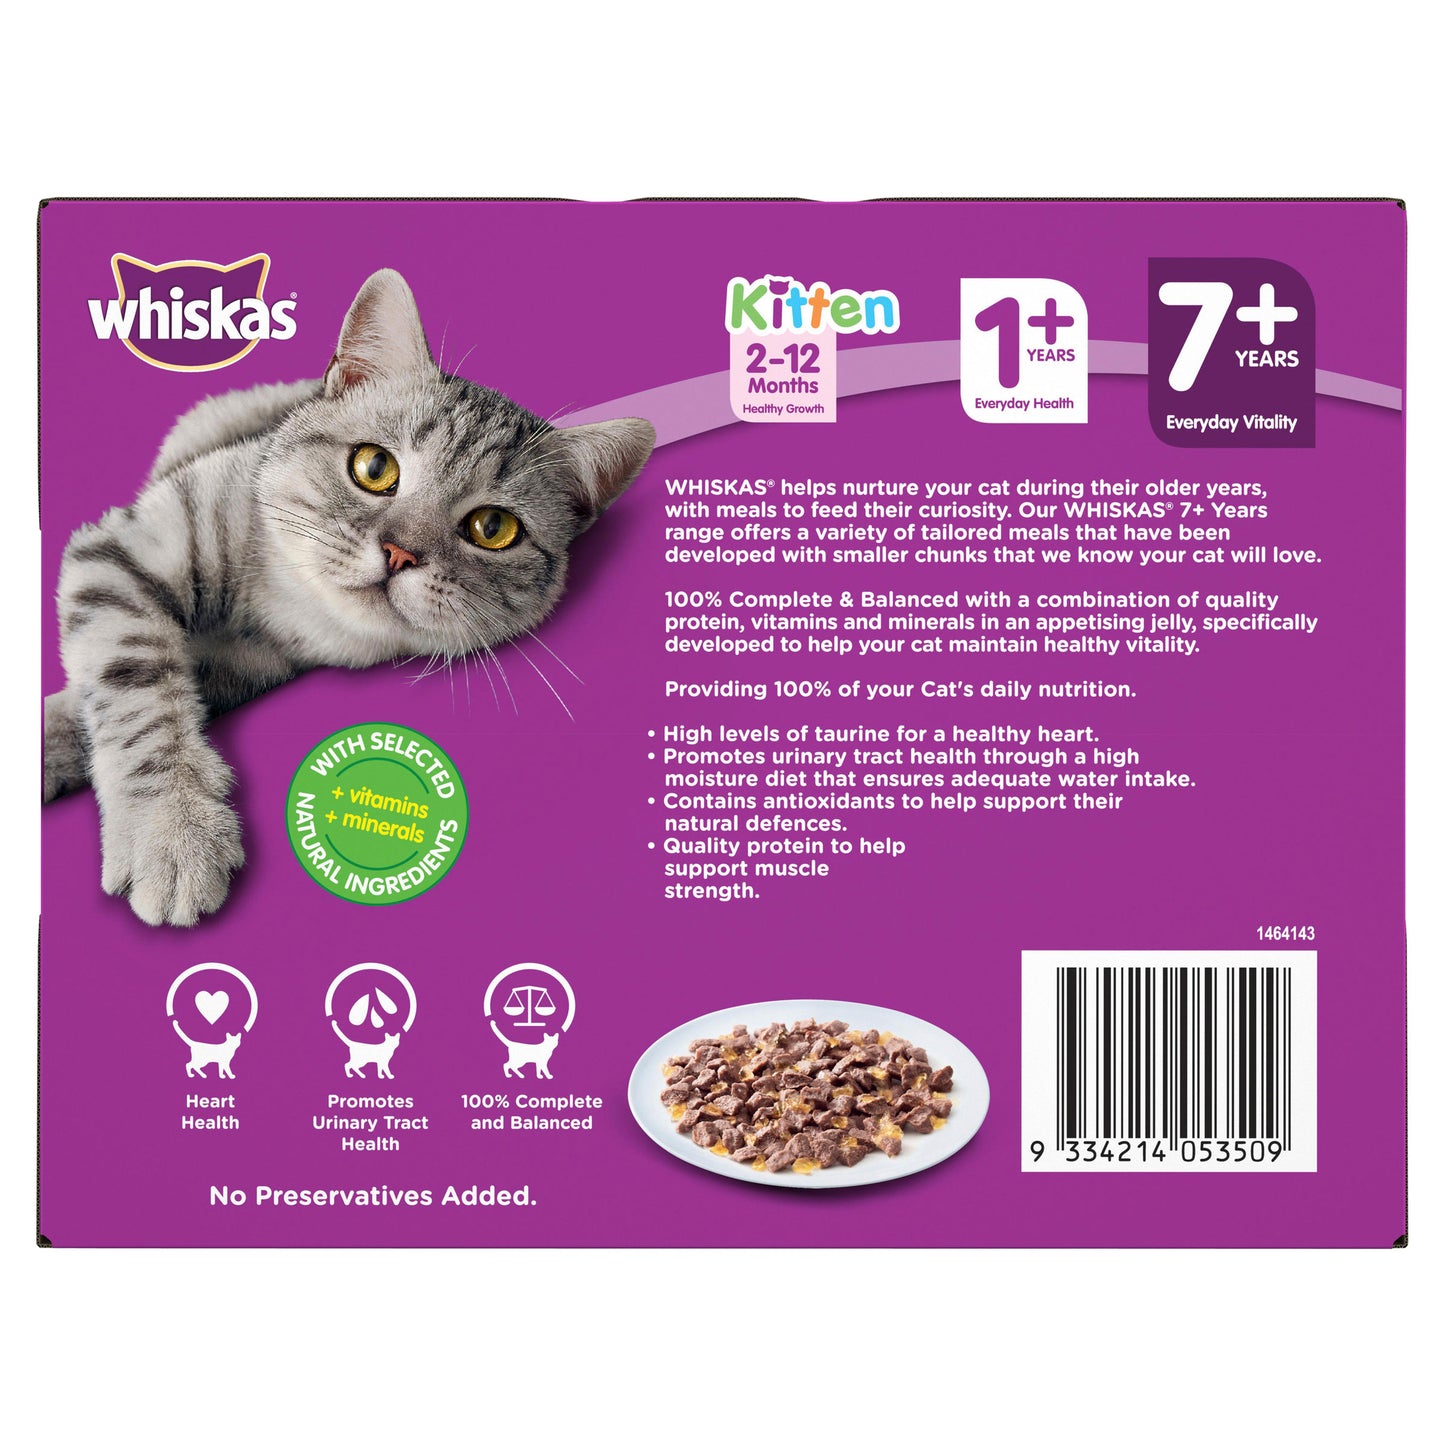 Whiskas Favourites Cat Senior 7+ Years Mixed In Jelly 12x85g